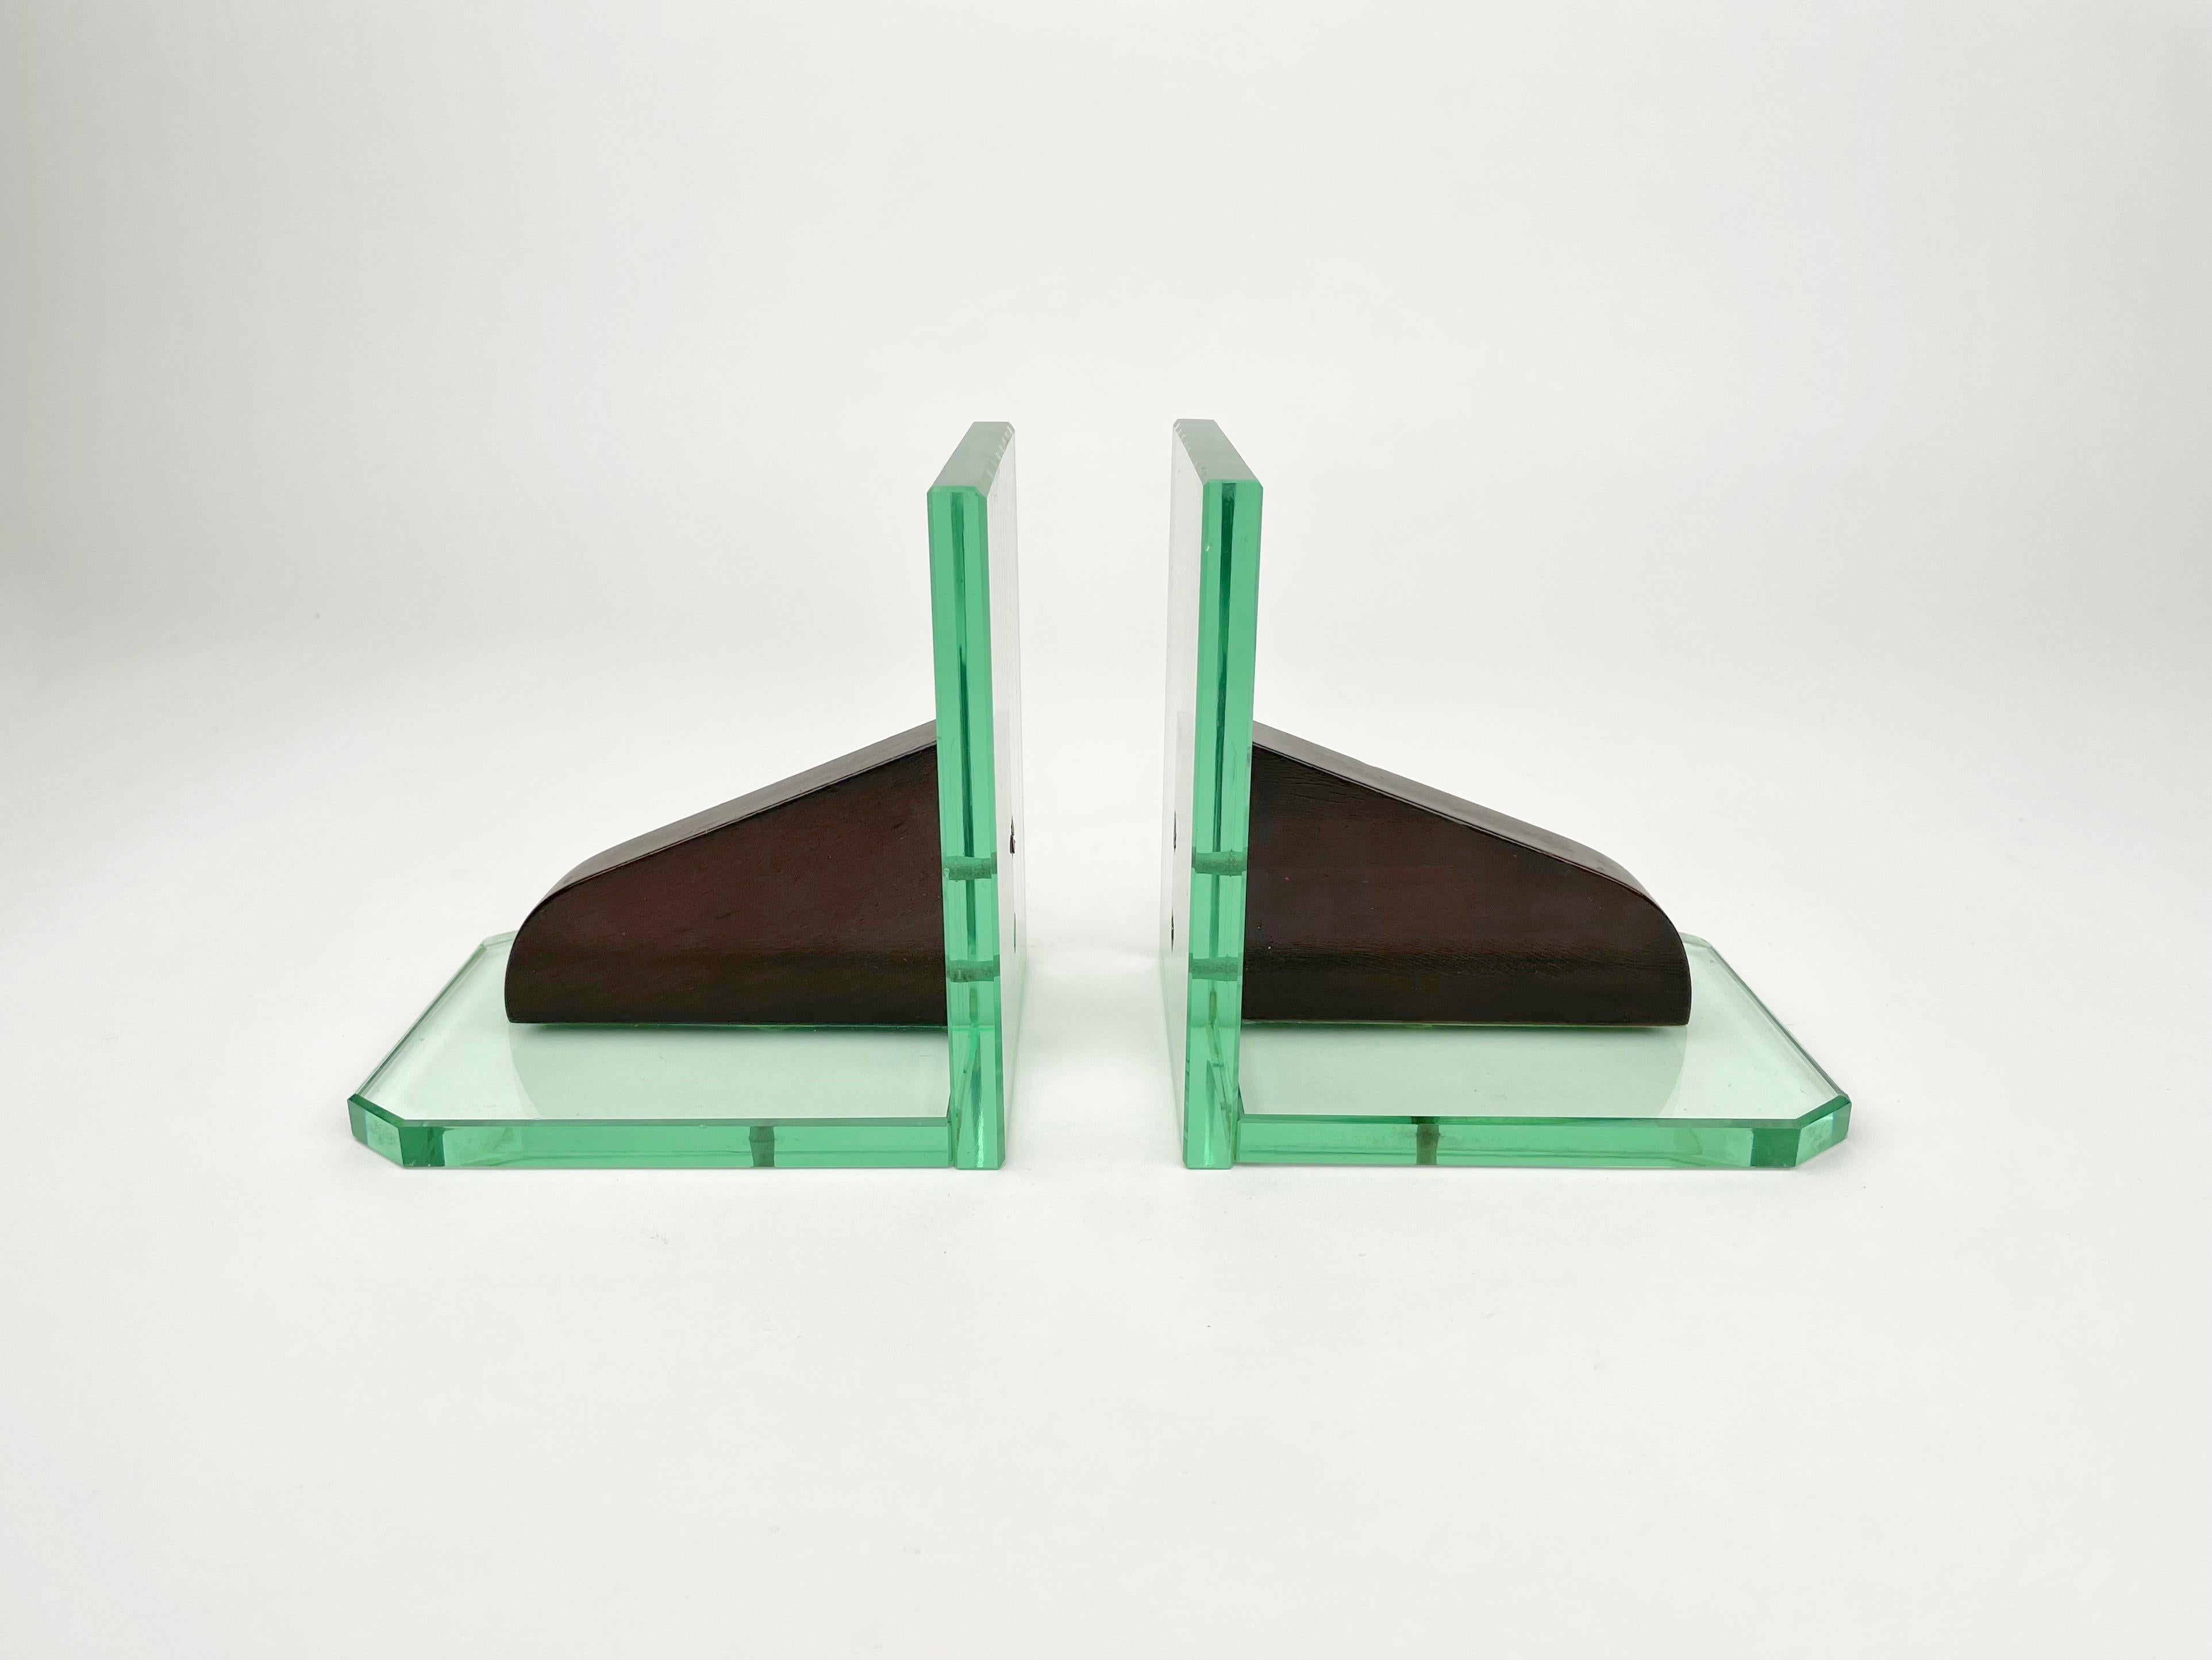 Pair of bookends in acquamarine glass structure and wood in the style of Fontana Arte. Made in Italy in the 1950s.